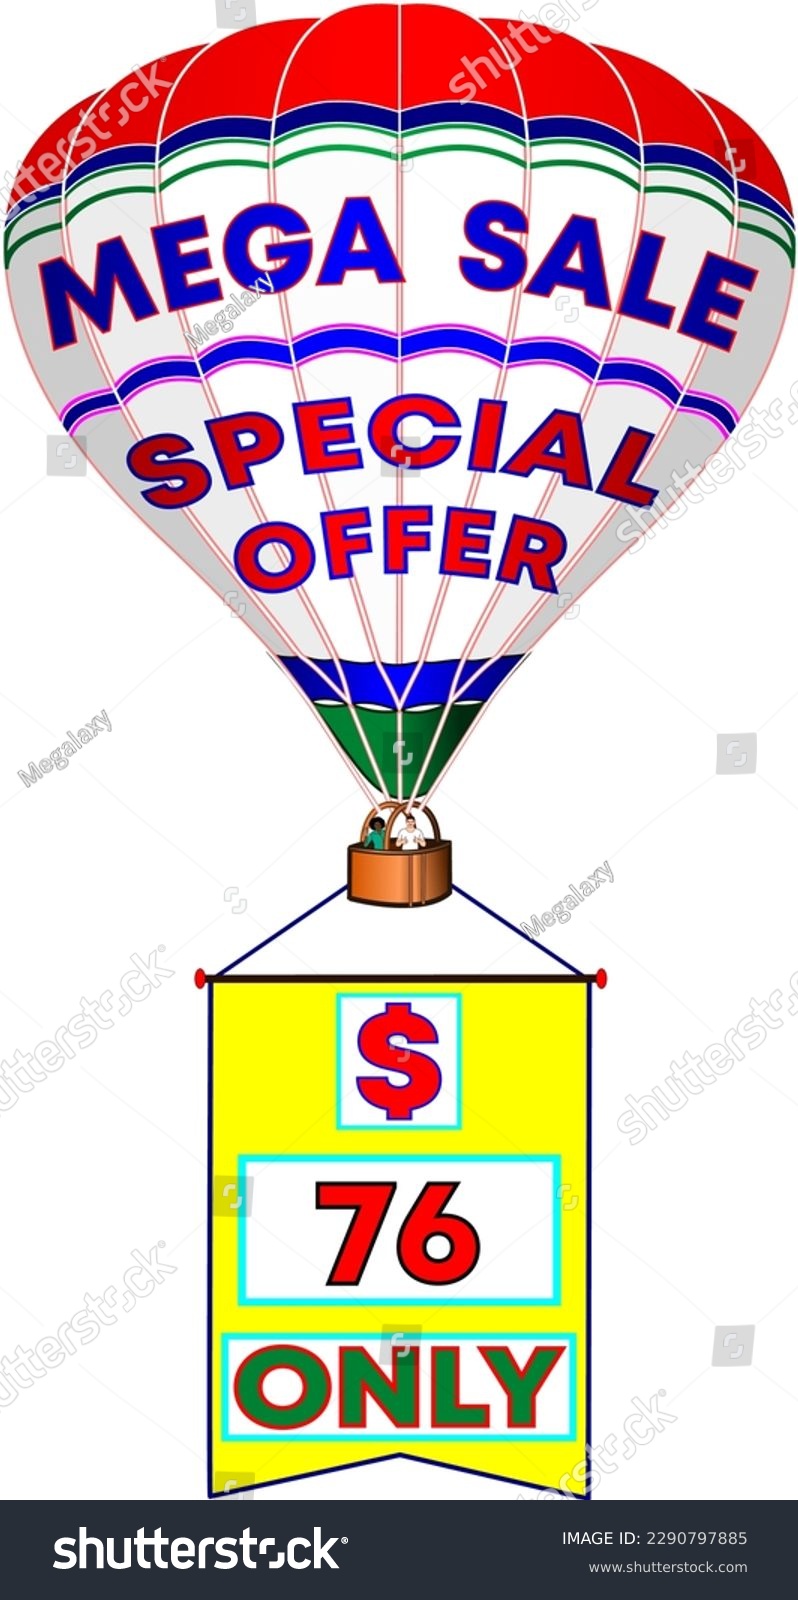 SVG of Mega sale special offer only 76 dollars, vector illustration of white balloon with promo banner, illustrative big promotion for wholesale and retail trade. God is good! svg